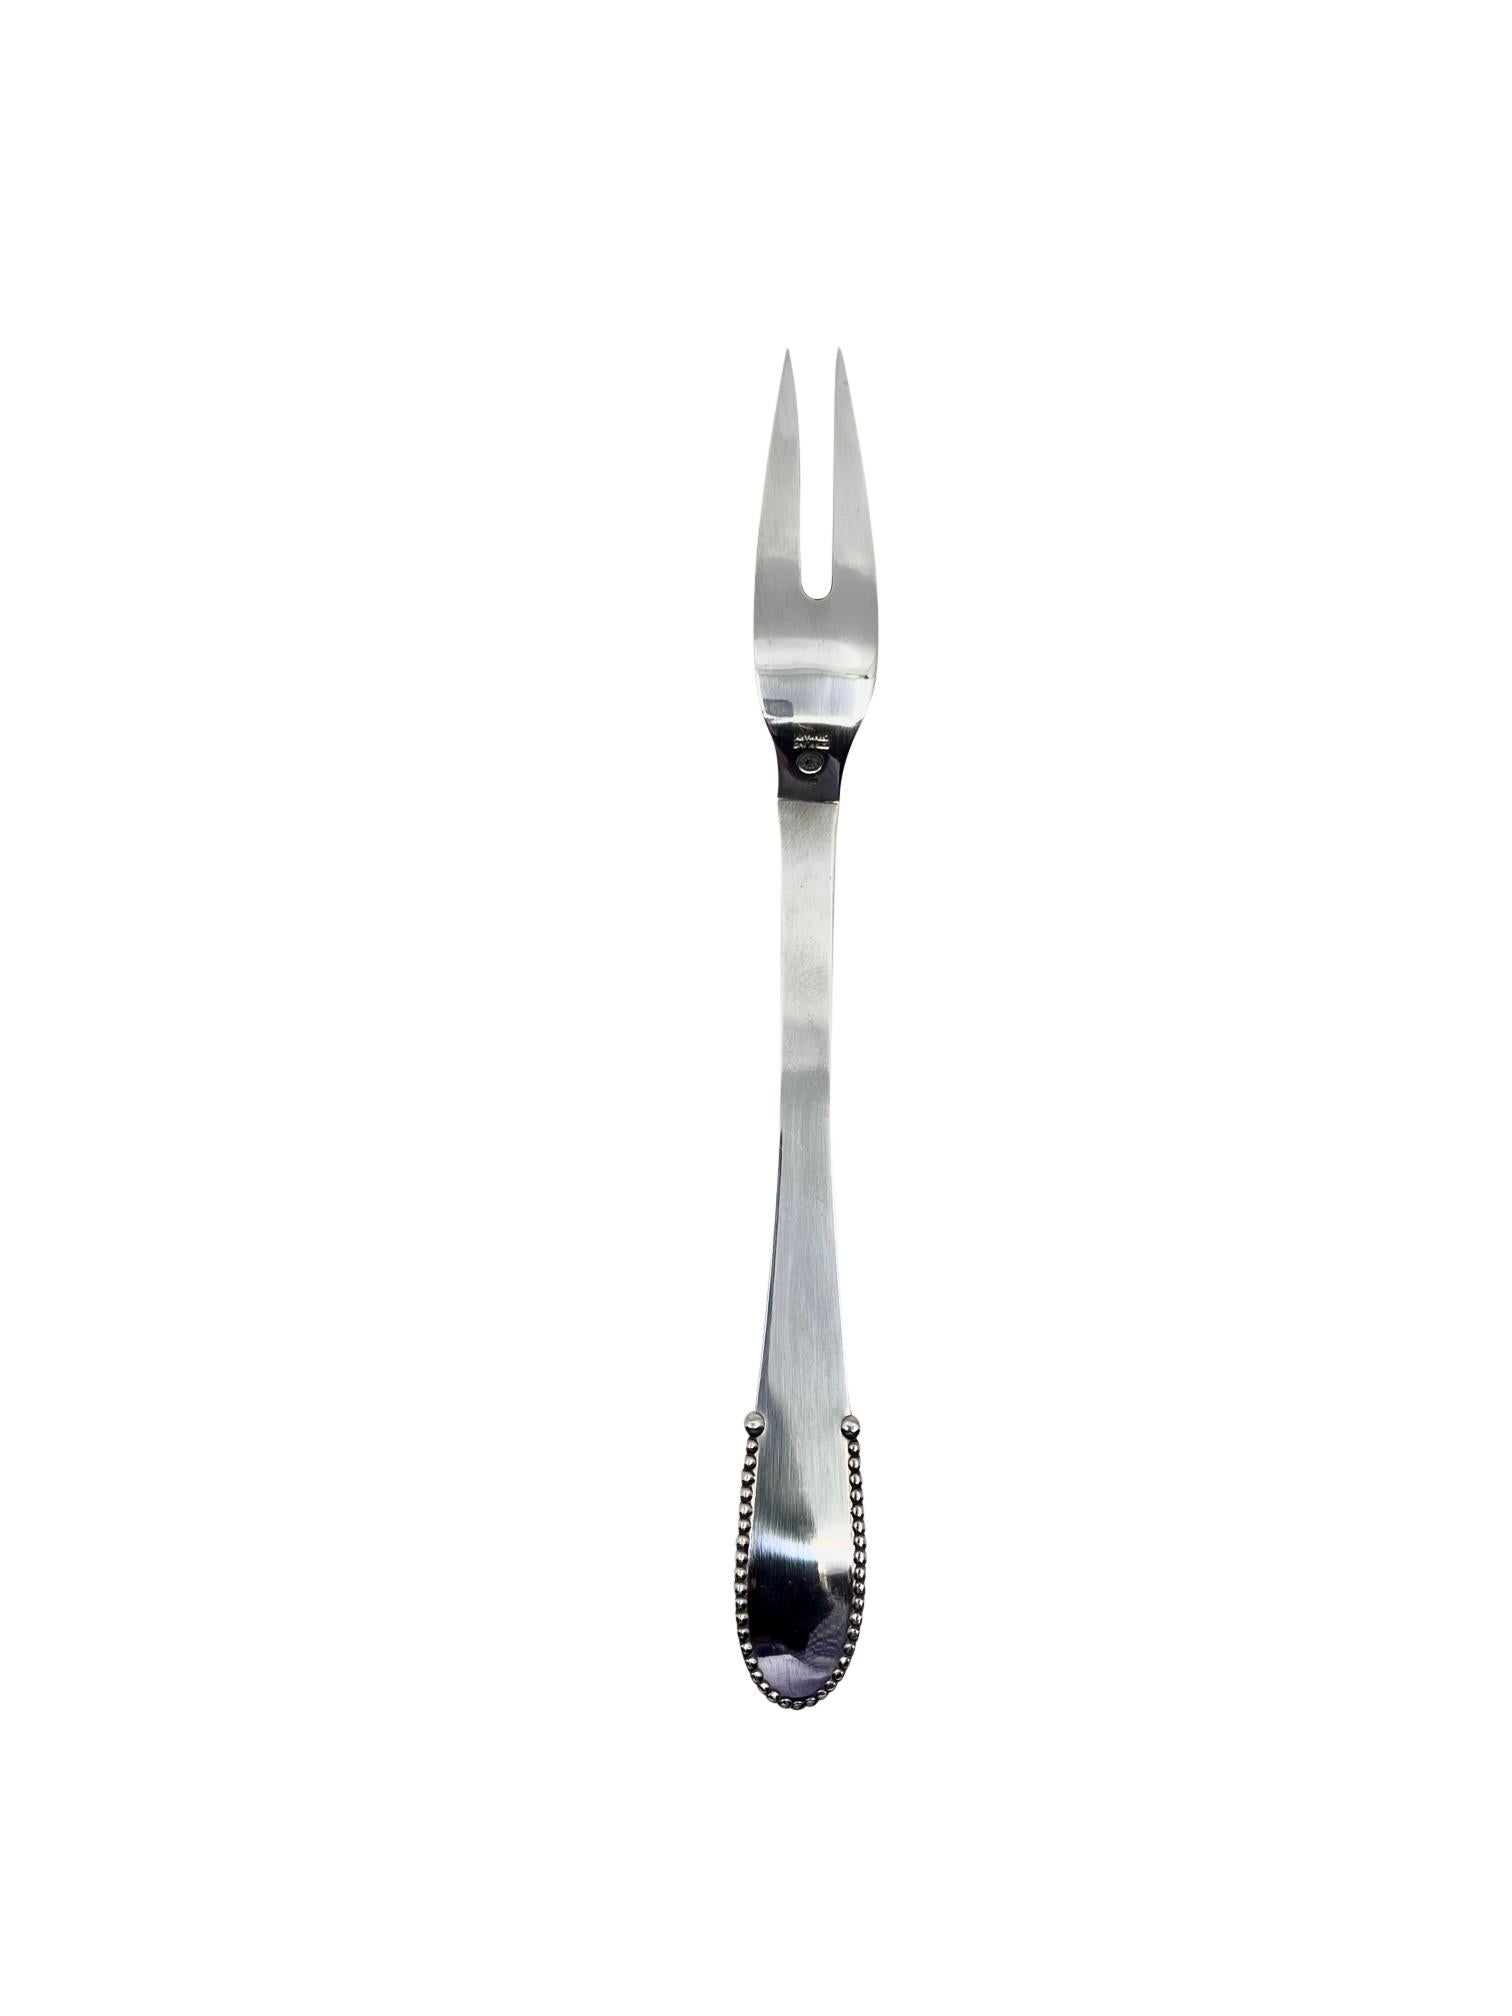 A sterling silver Georg Jensen meat fork, item #143 in the Beaded pattern, design #7 by Georg Jensen from 1916.

Additional information:
Material: Sterling Silver
Style: Art Nouveau
Hallmarks: Measures 8″ (20 cm) in length.
Dimensions: Measures 8″